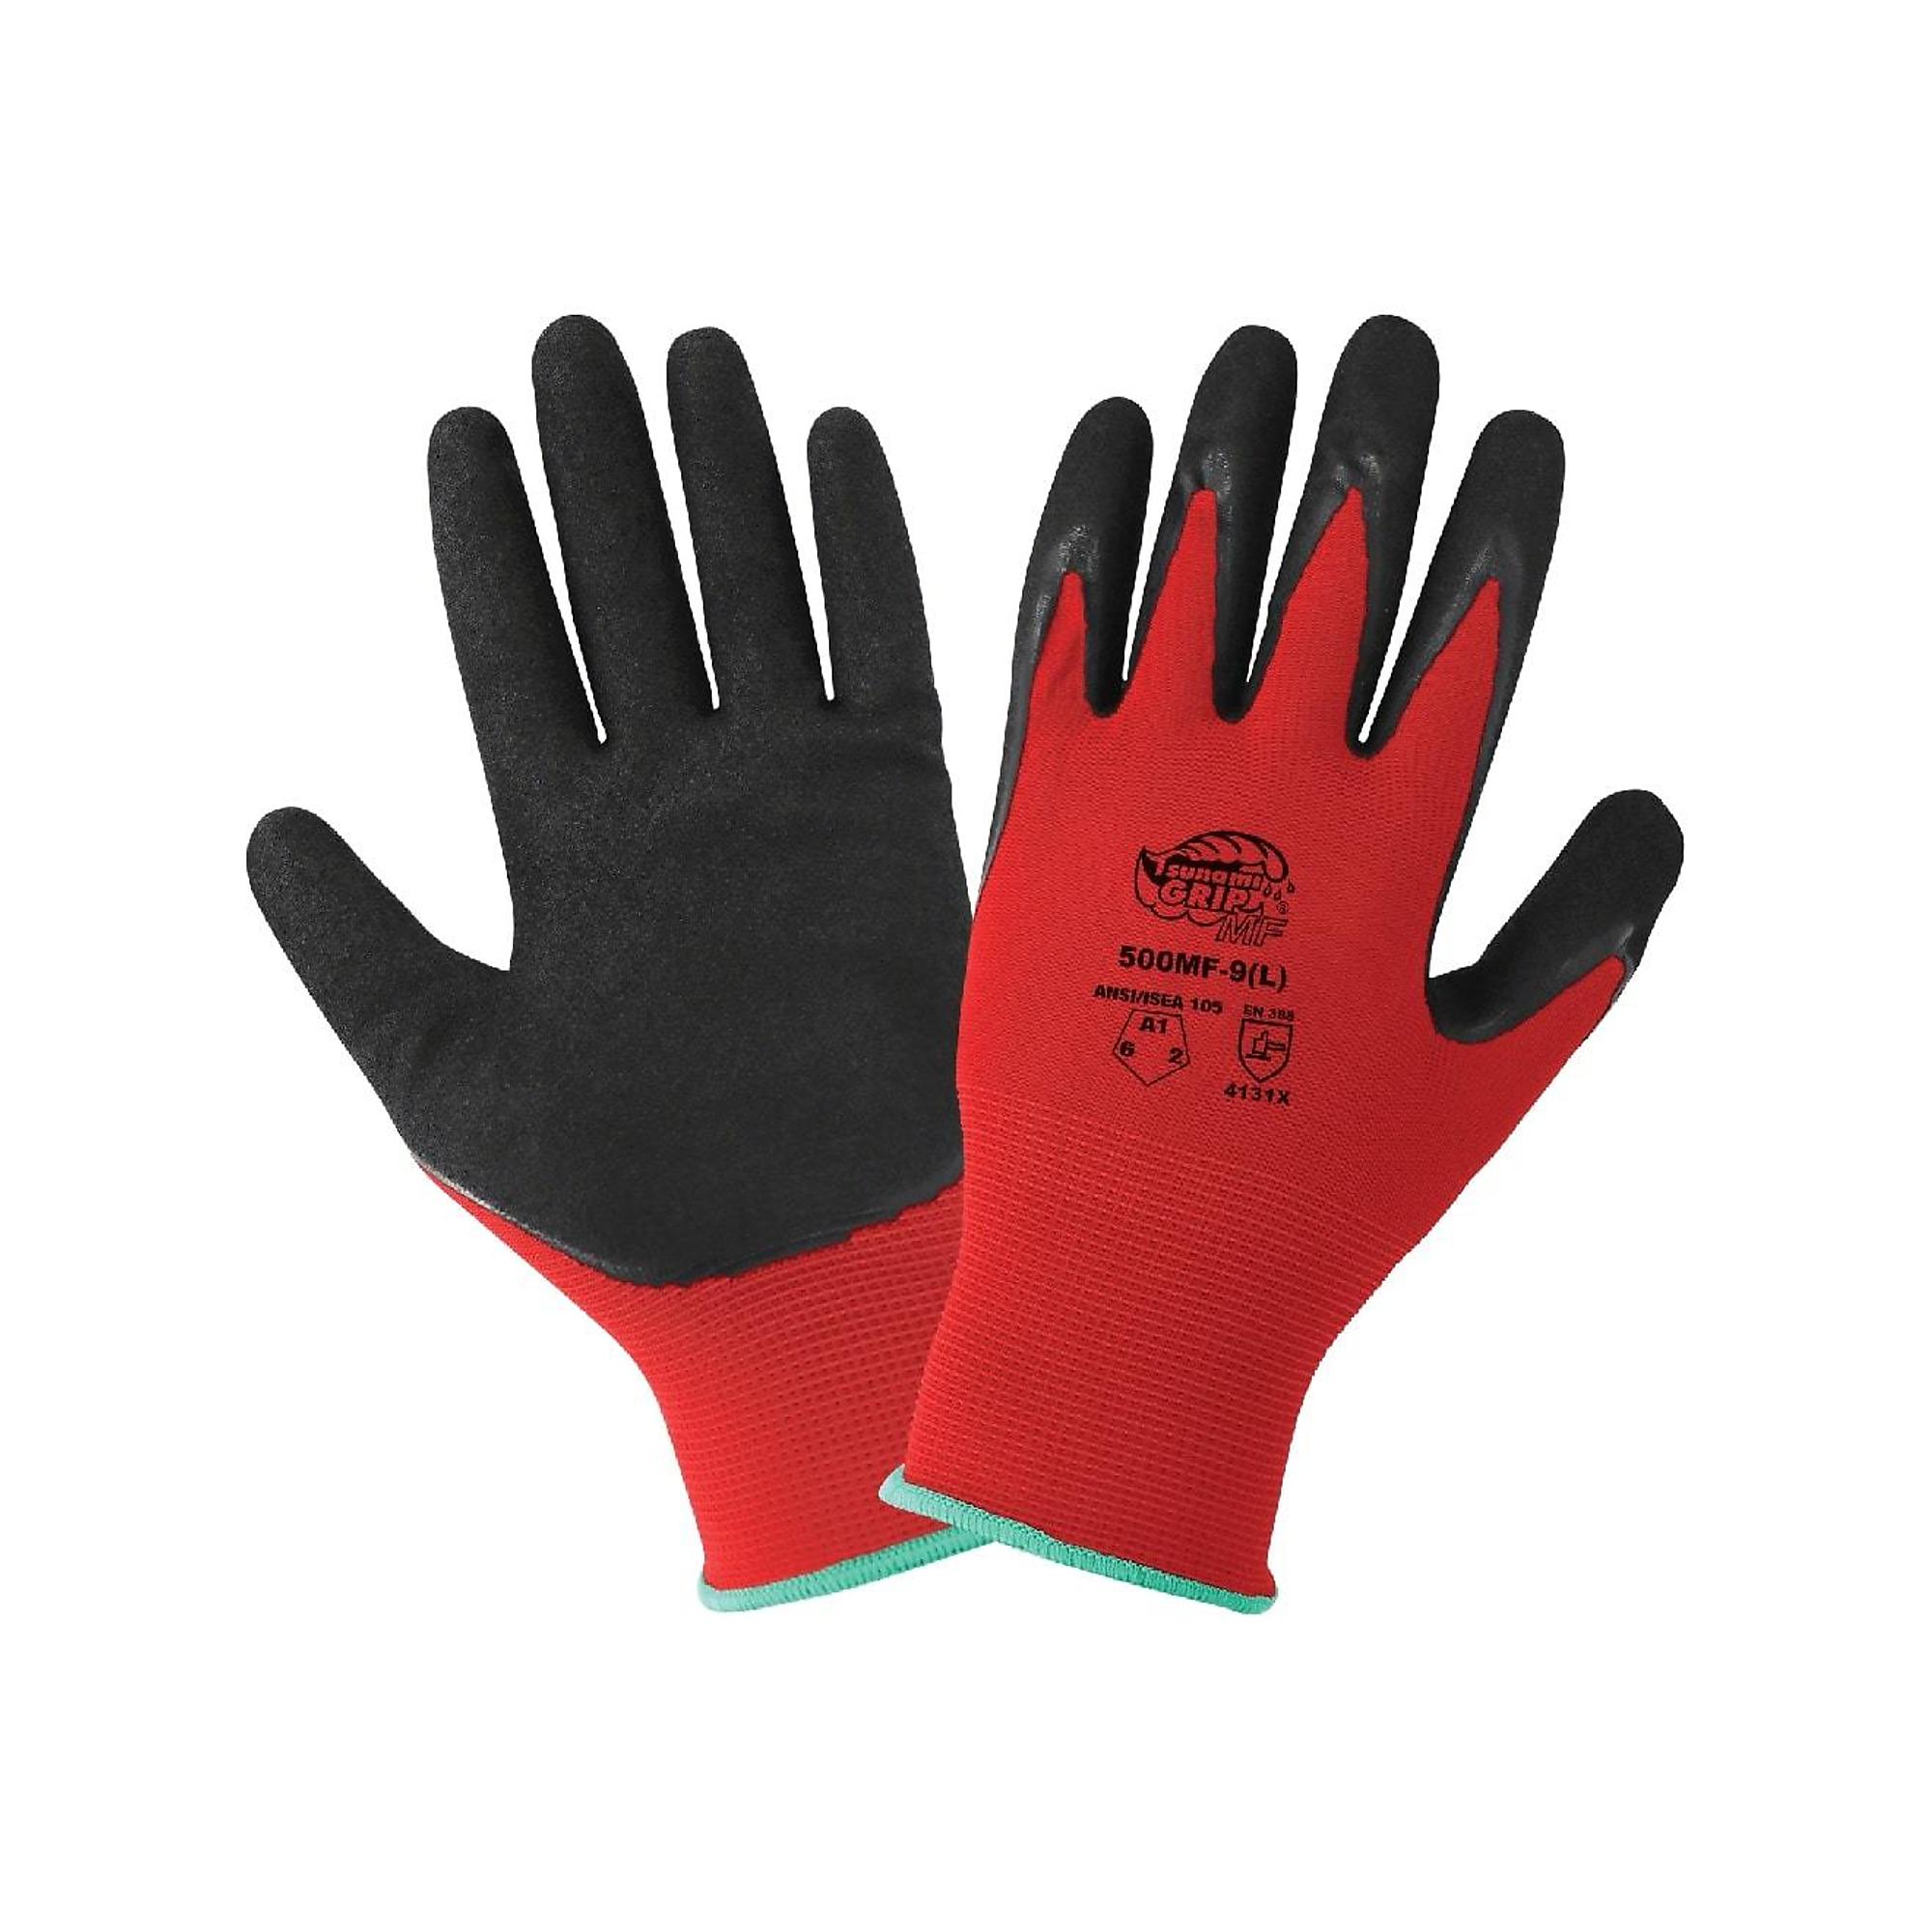 Global Glove Tsunami Grip , Red, Black Double Nitrile Coat, Cut Resist A1 Gloves-12 Pair, Size XL, Color Red/Black, Included (qty.) 12 Model 500MF-10(